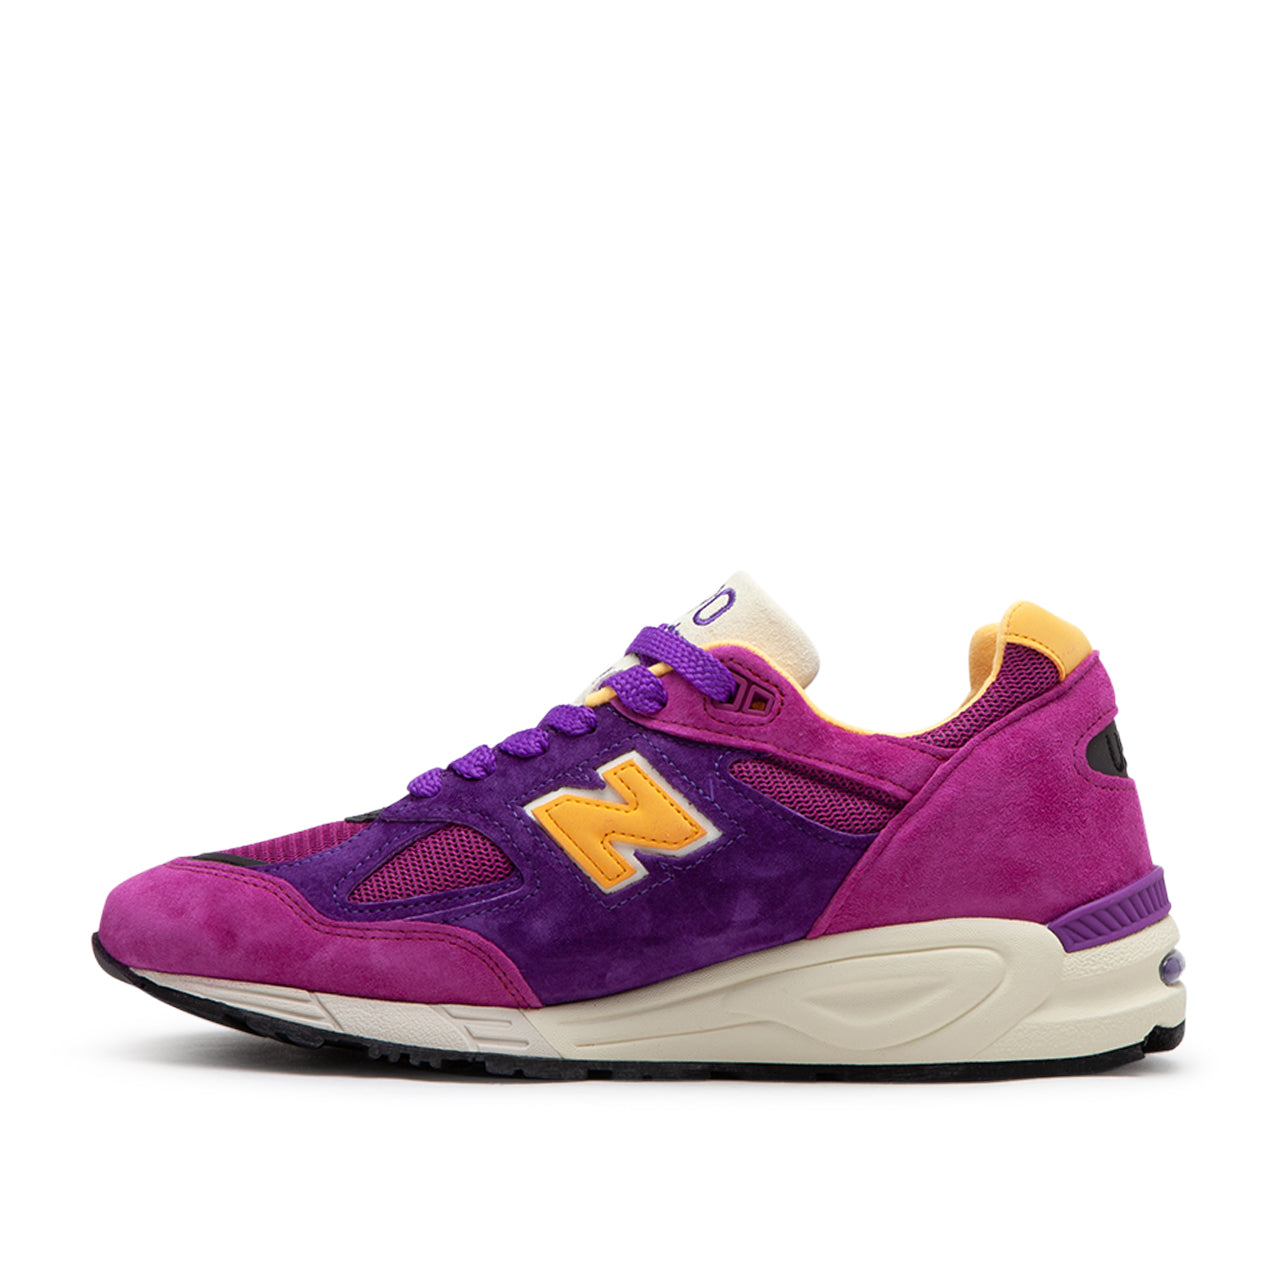 New Balance M990PY2 Made in USA (Pink / Lila)  - Allike Store